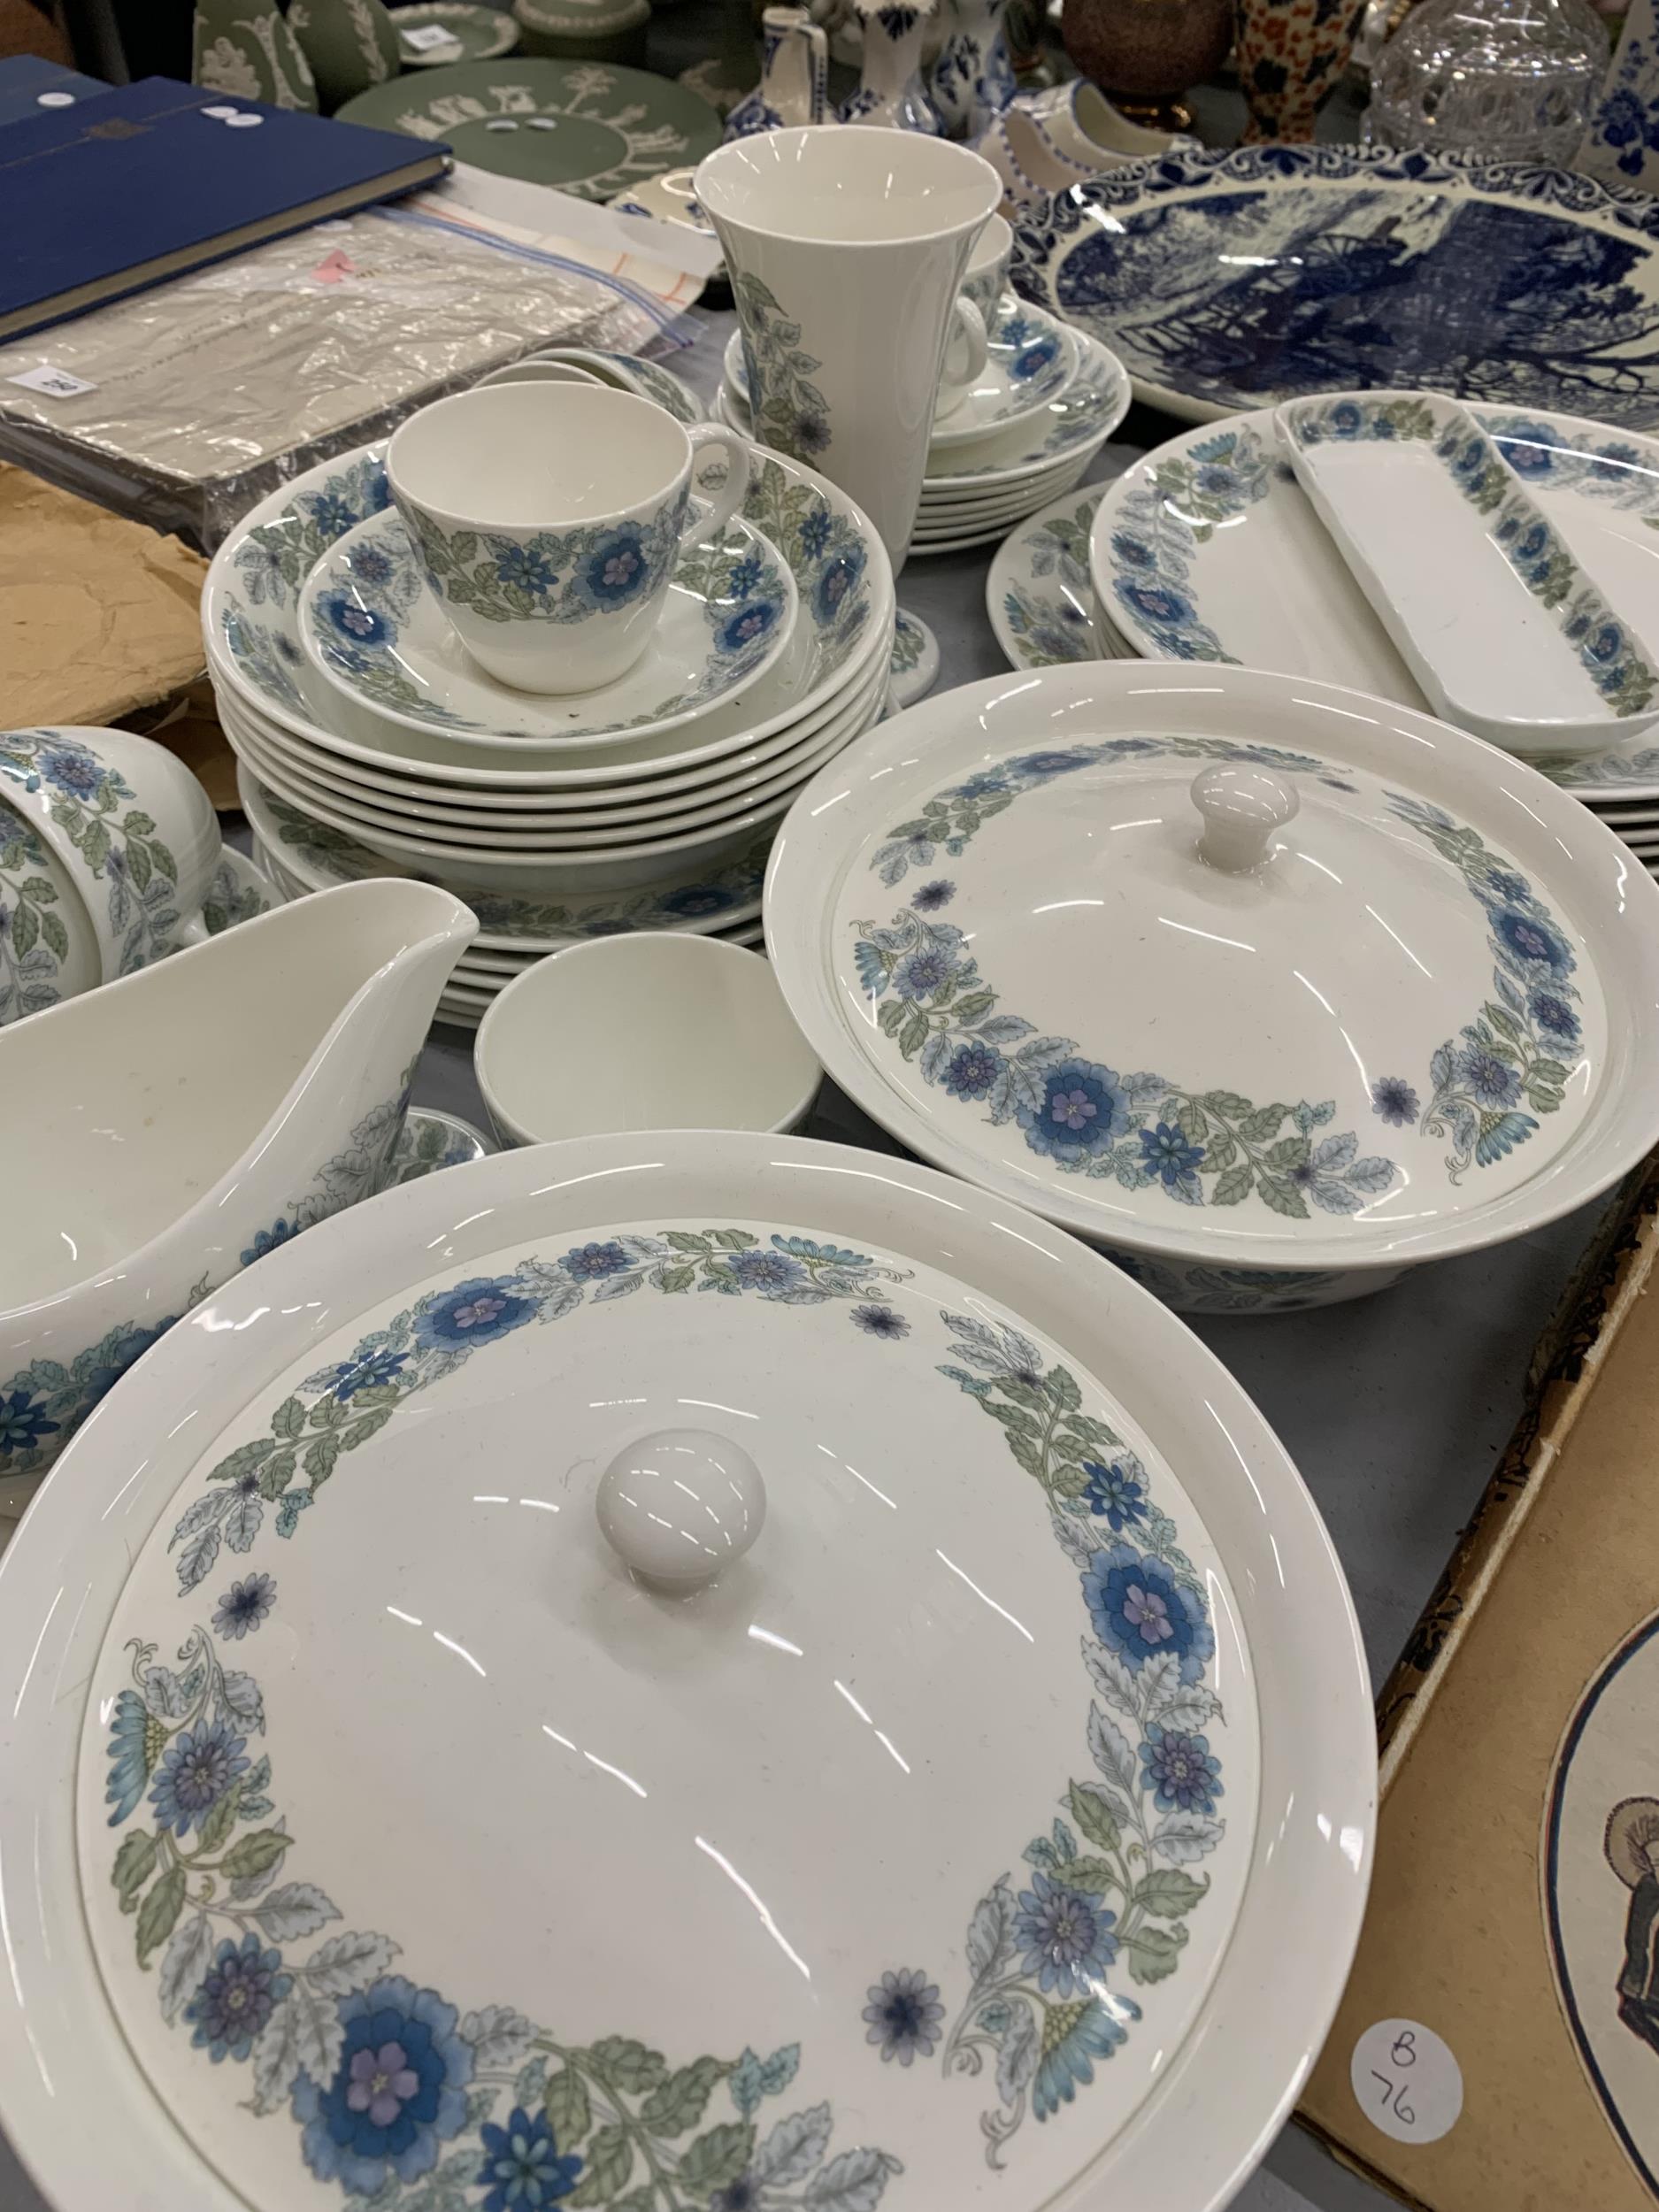 A WEDGWOOD 'CLEMENTINE' PART DINNER SERVICE TO INCLUDE PLATES, BOWLS, SERVING TUREENS, SAUCE BOAT - Image 5 of 7